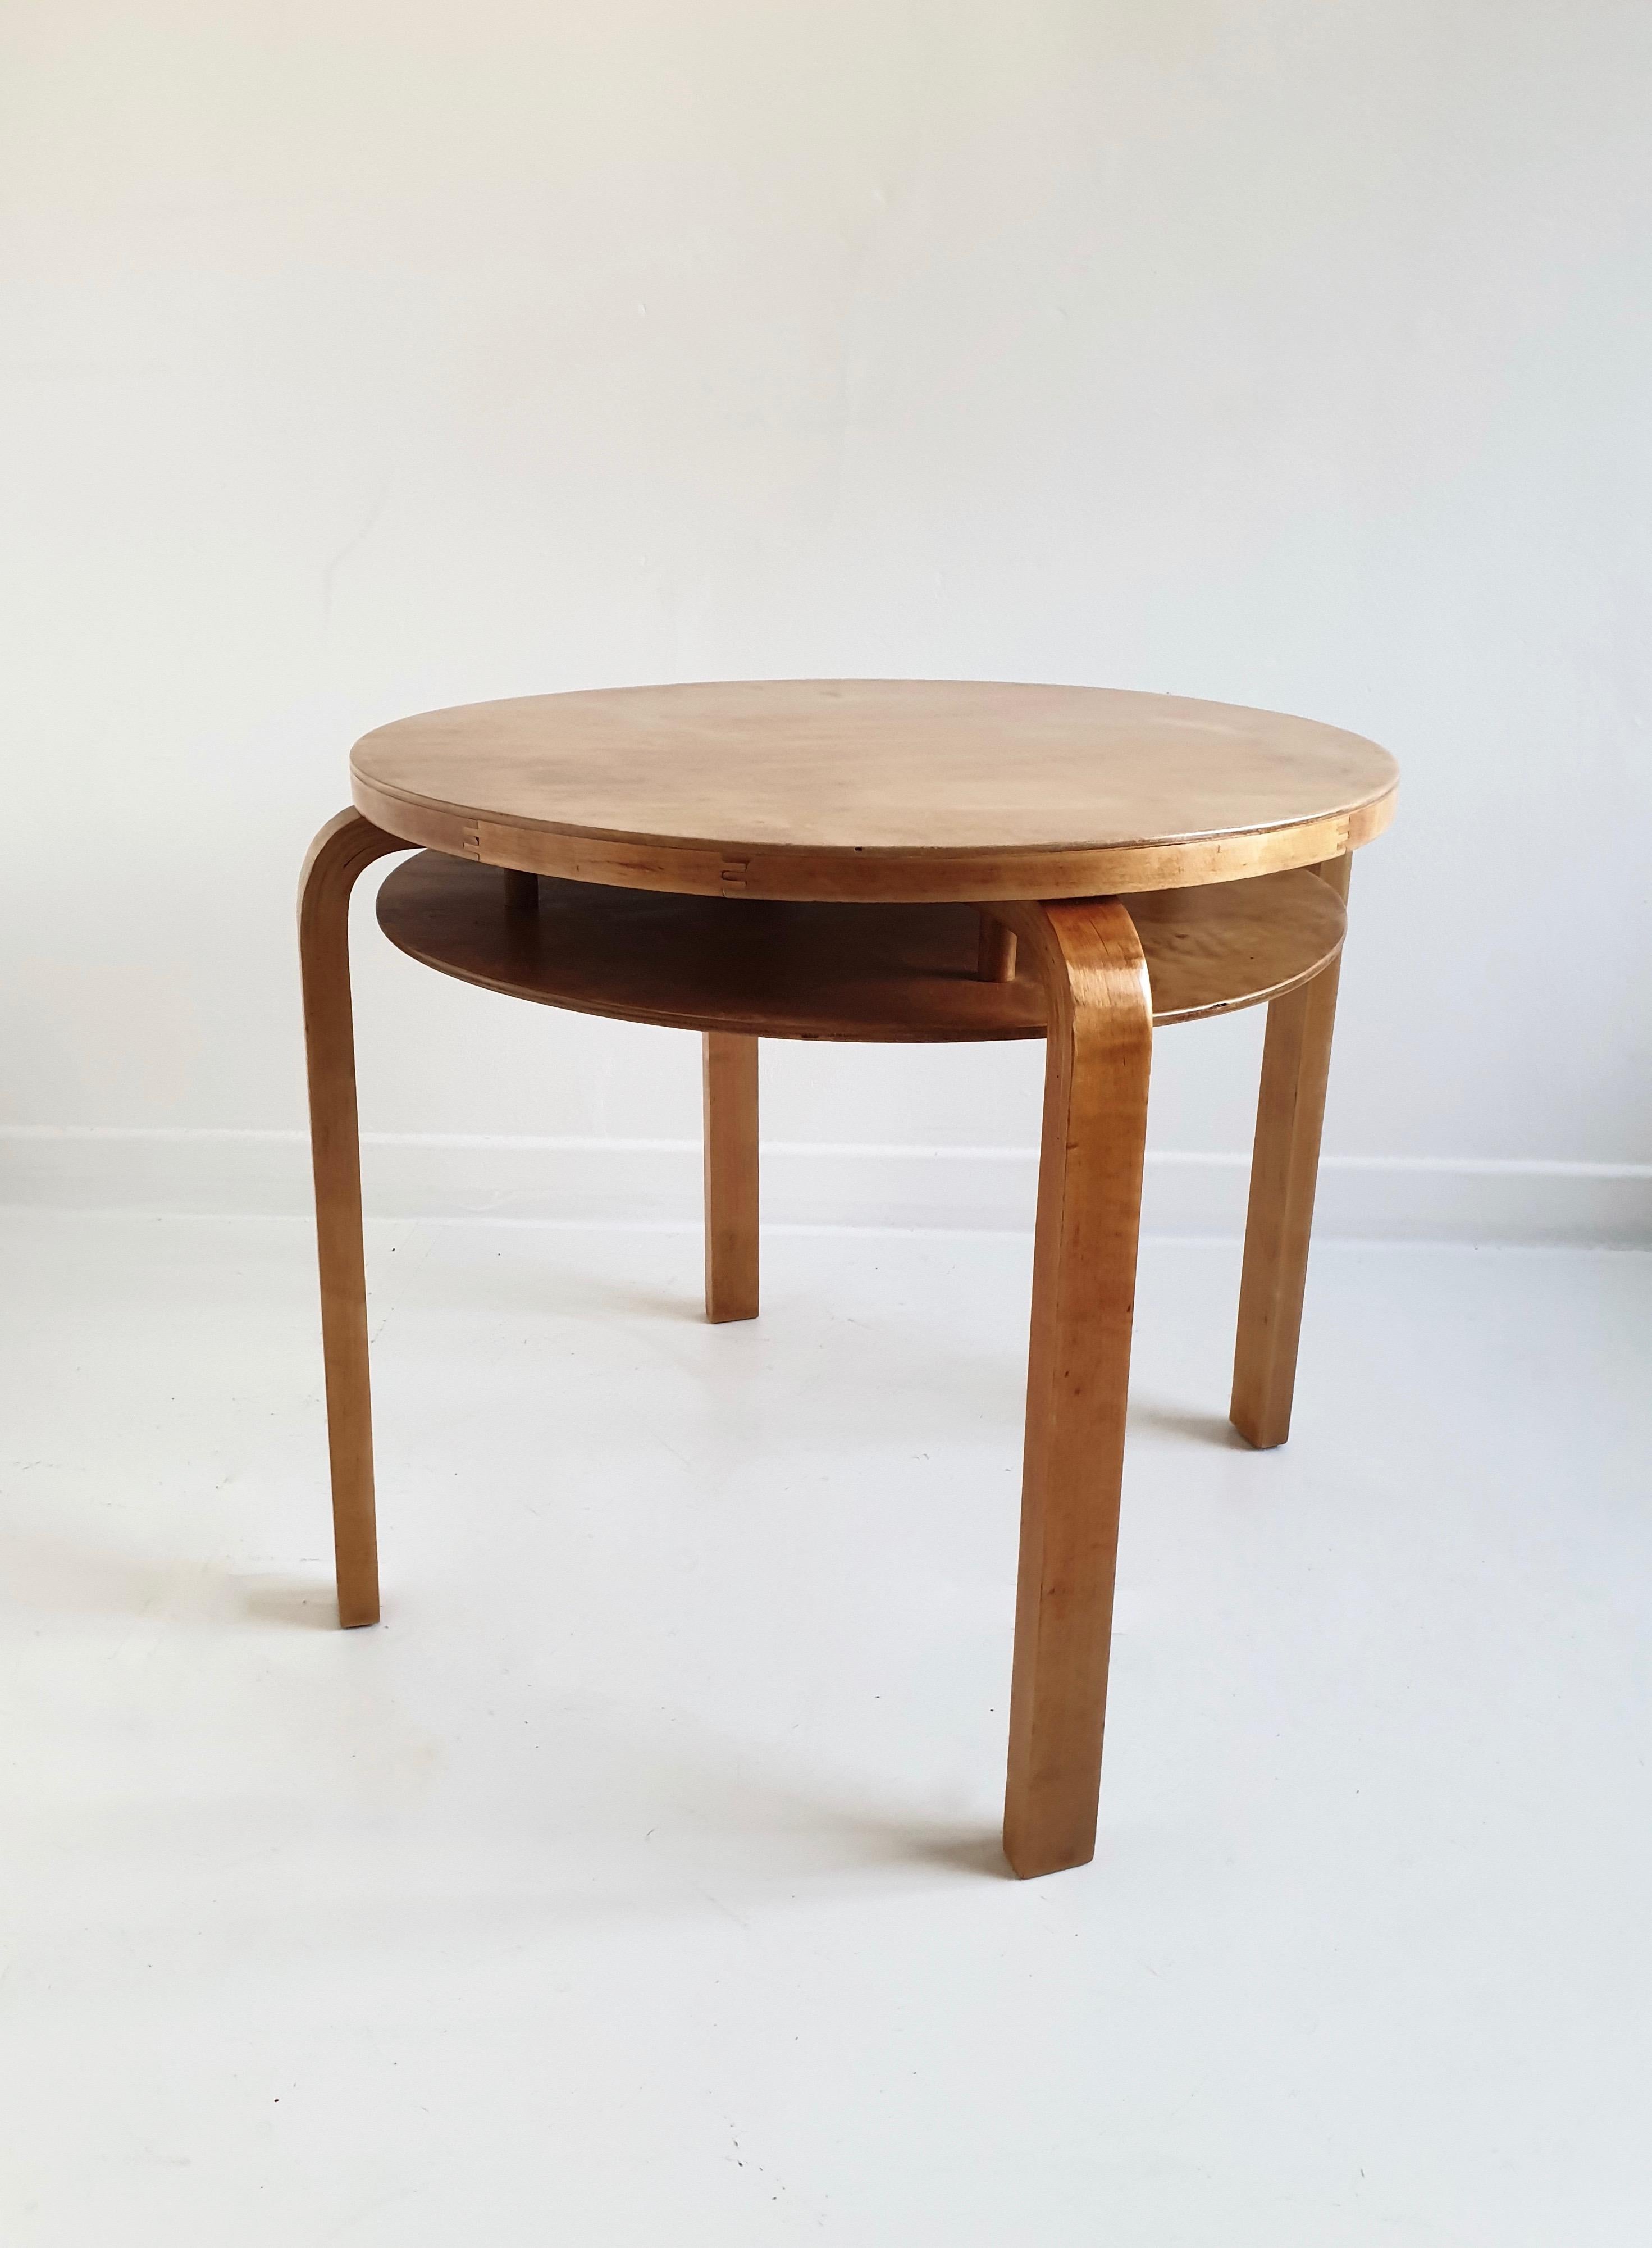 Finnish Pair of Rare '907' Stacking Side Tables by Alvar Aalto for Artek, circa 1940 For Sale